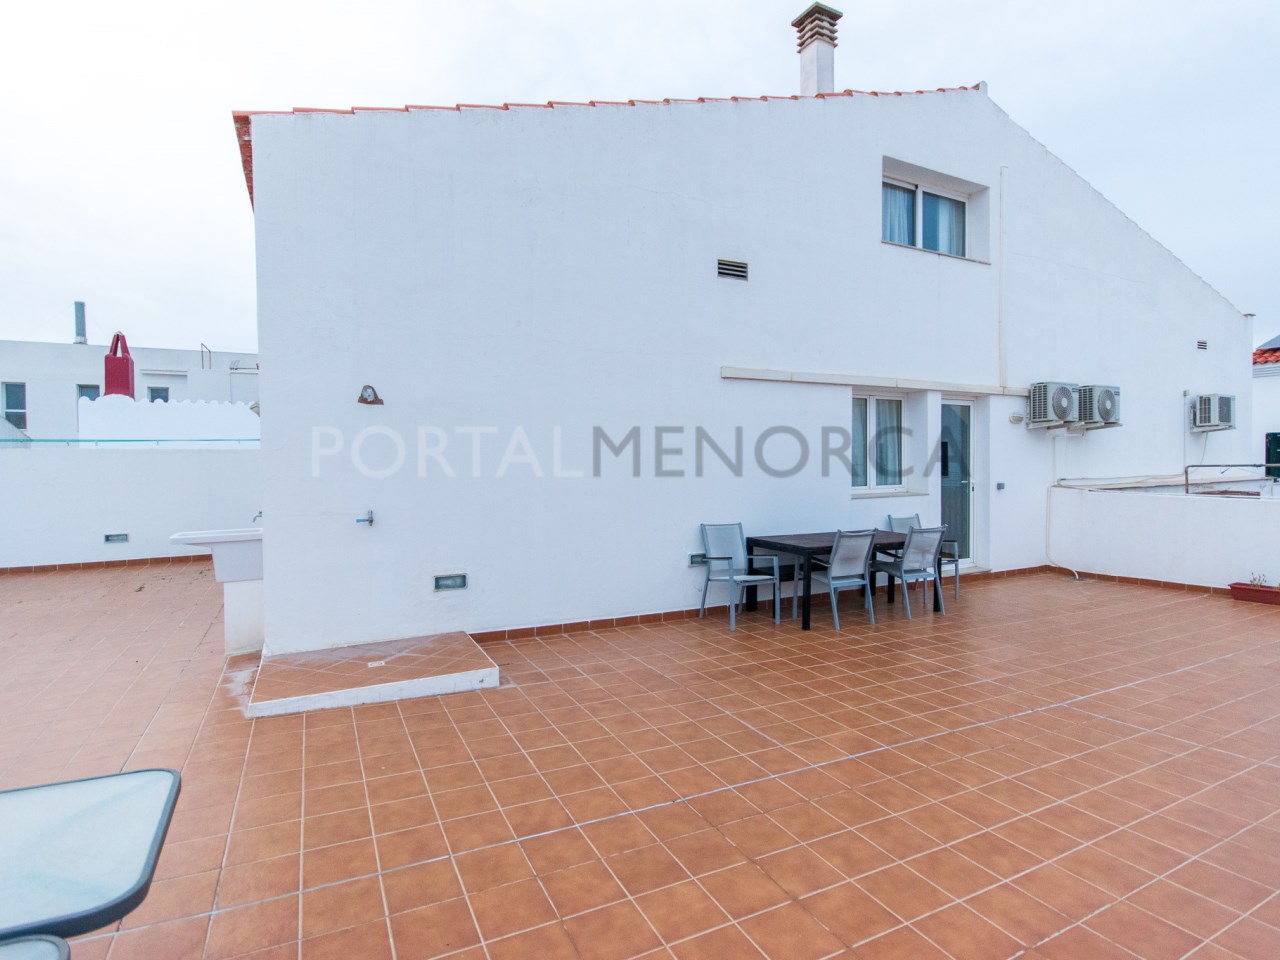 Terrace of a building for sale in the village of Sant Lluis